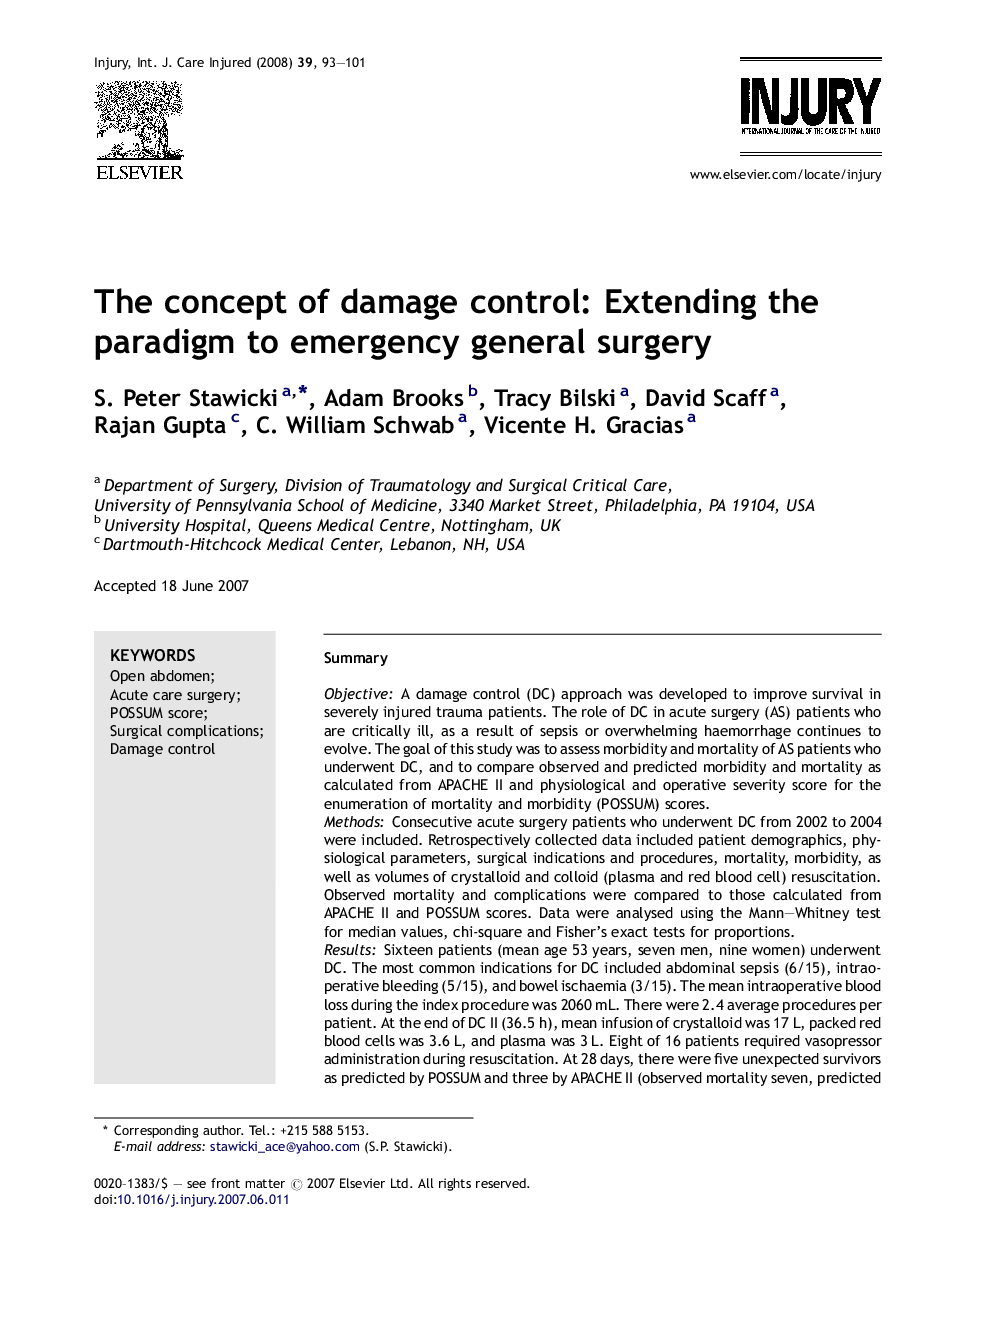 The concept of damage control: Extending the paradigm to emergency general surgery